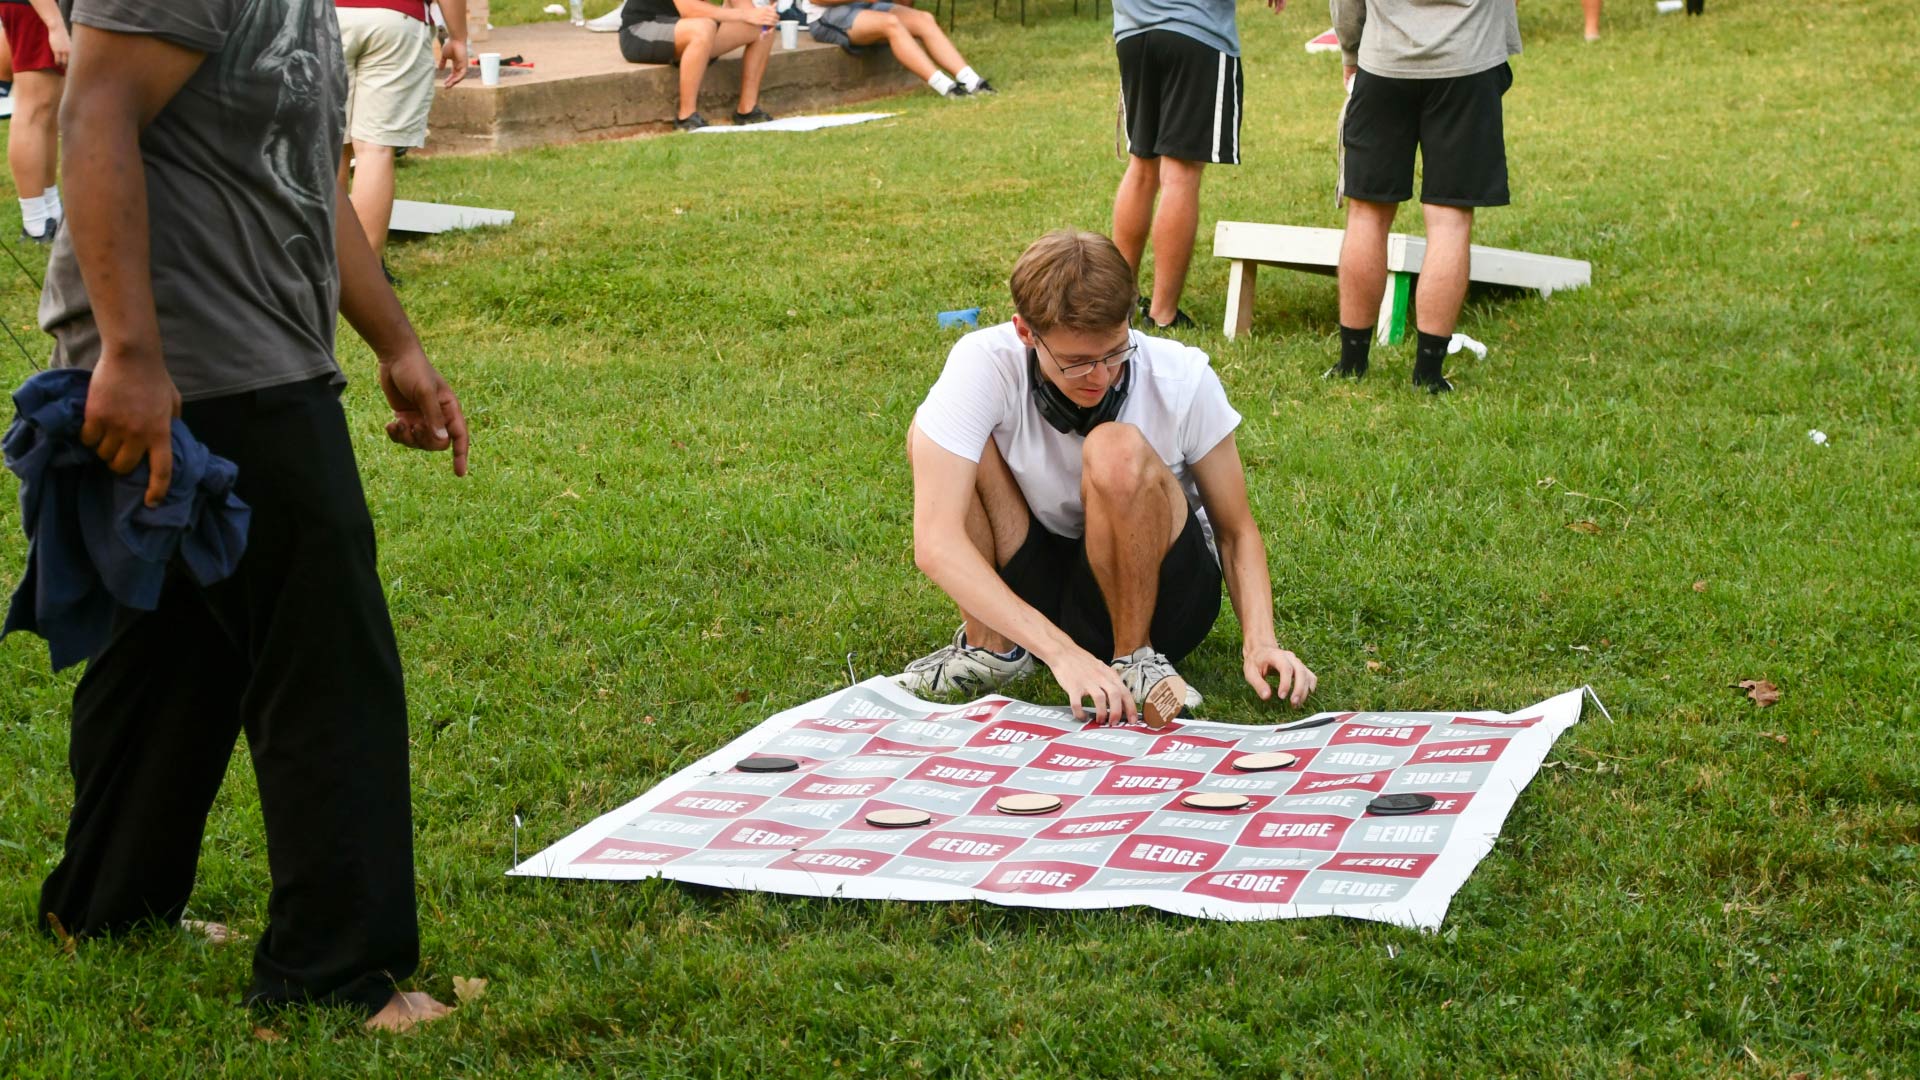 Students play a lifesize game of checkers at EdgeFest.